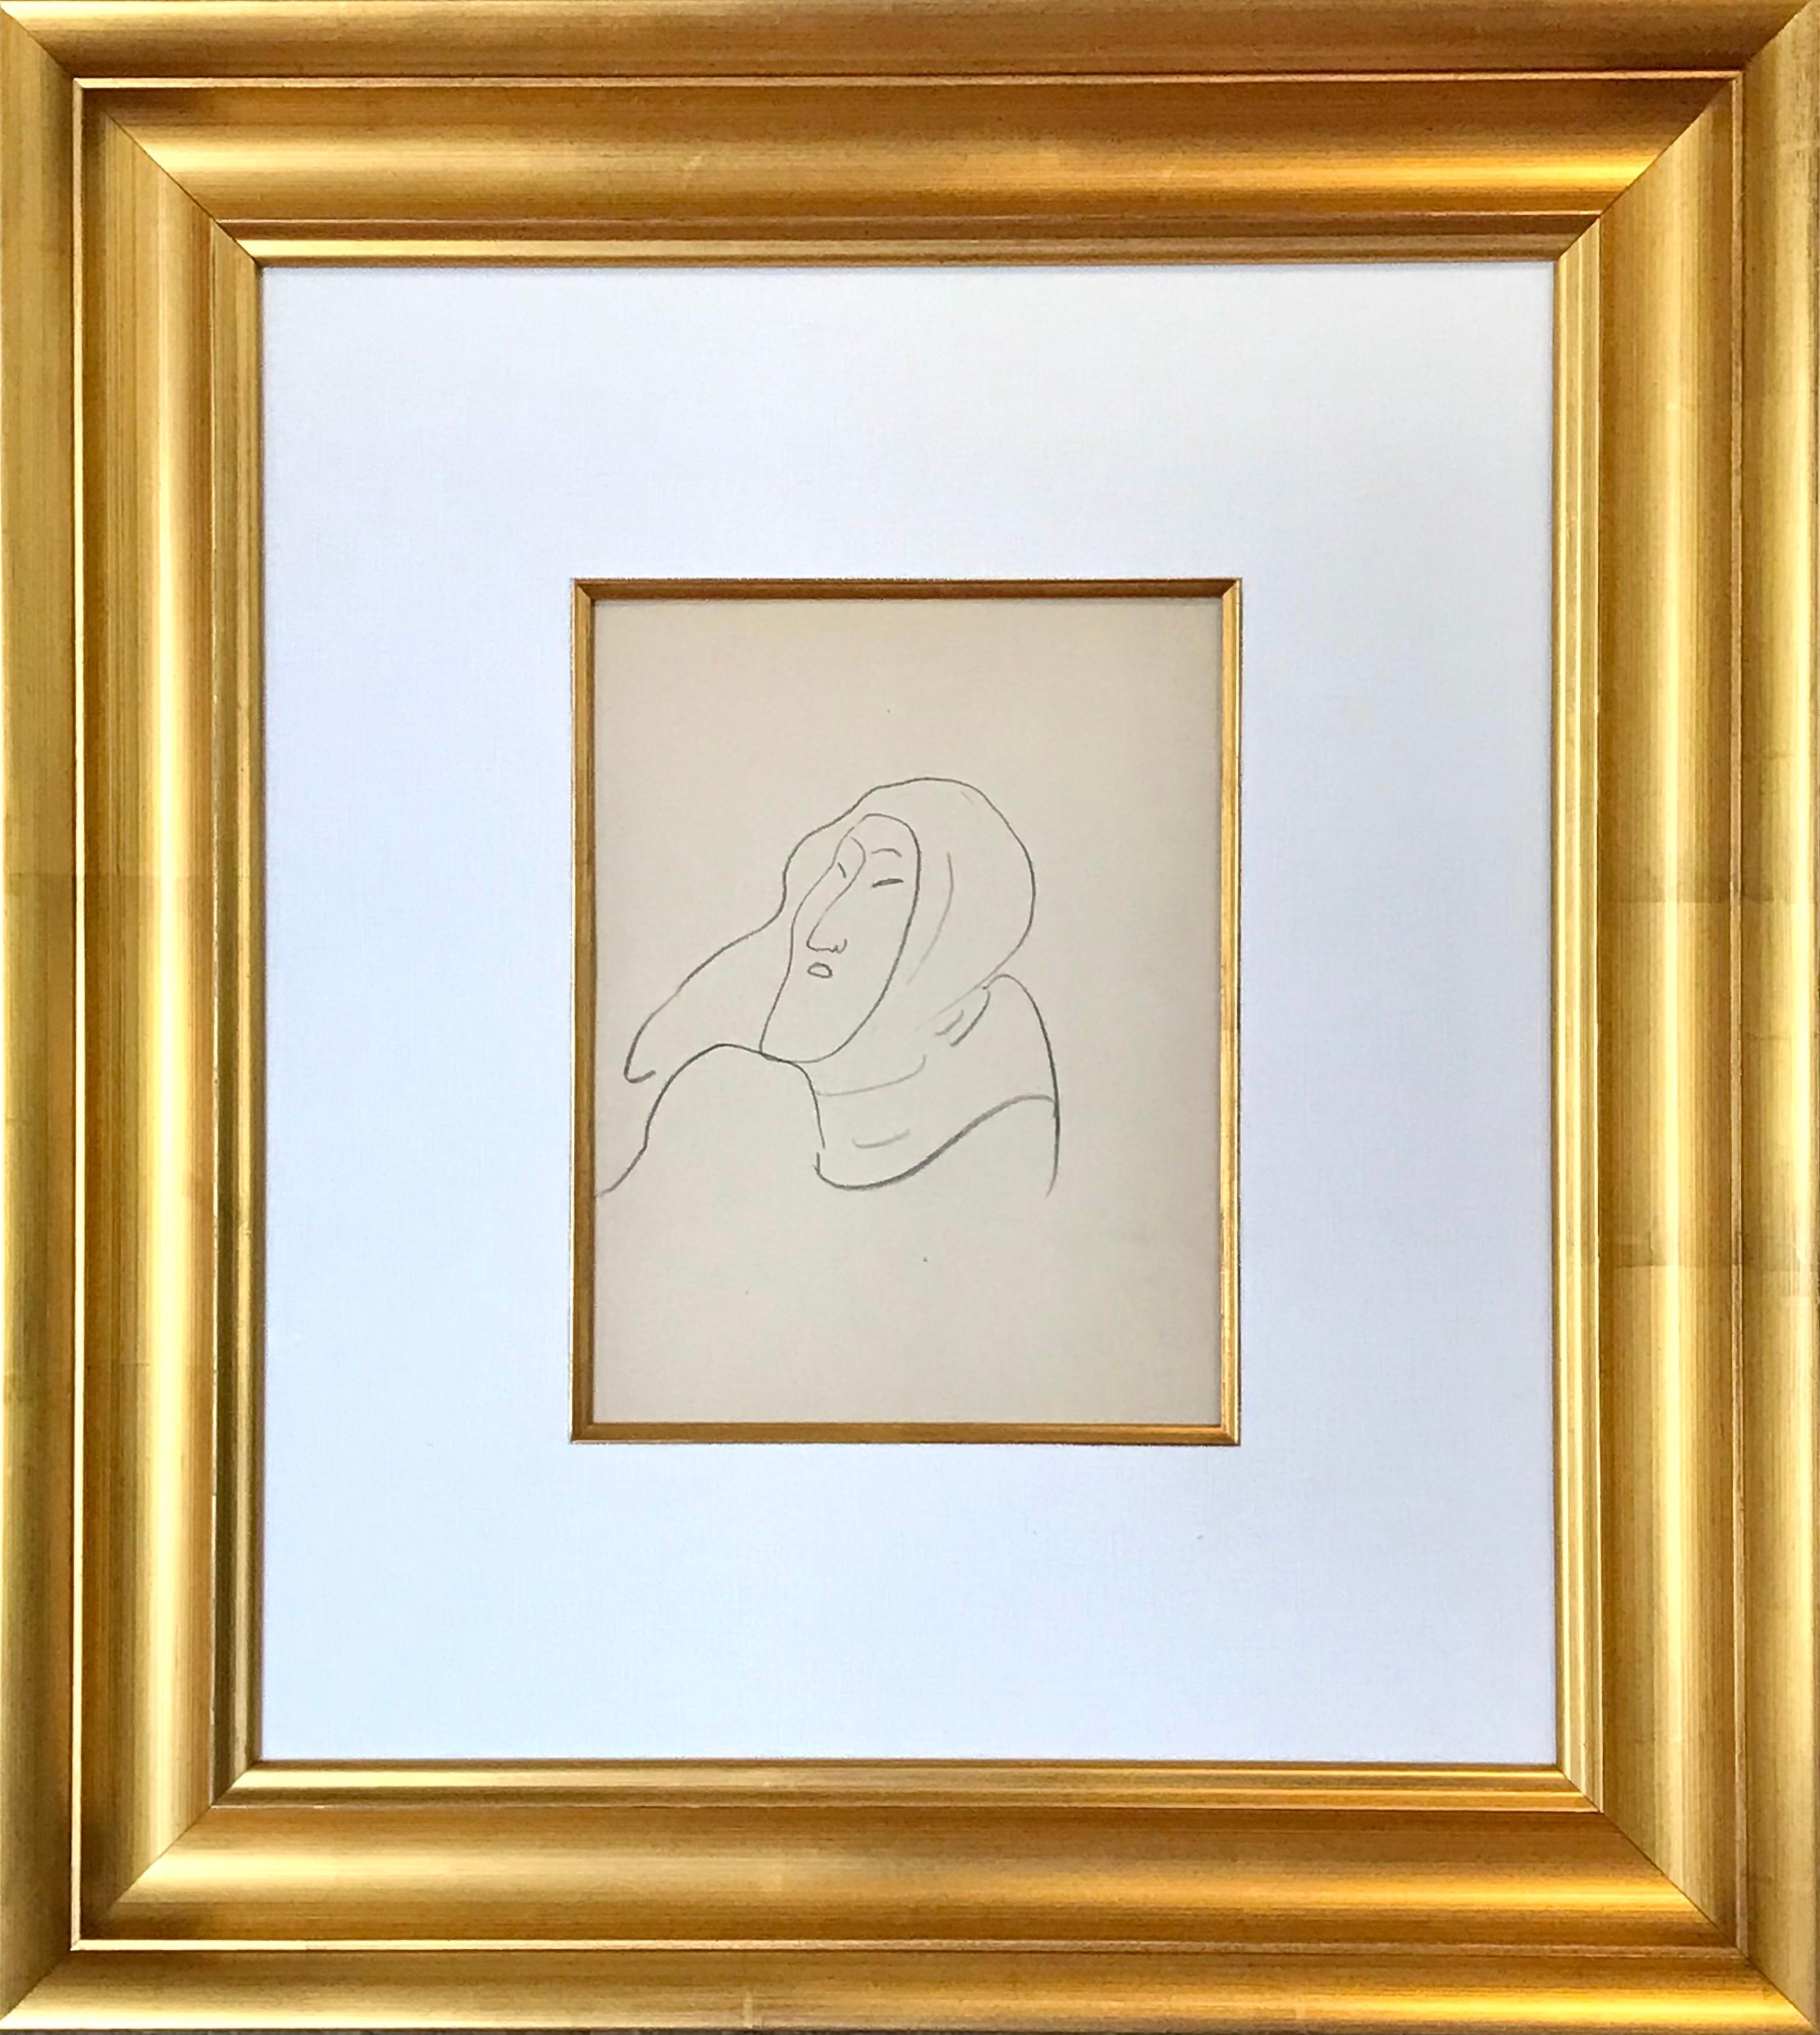 Henri Matisse Drawing Of An Eskimo COA By George Matisse.
Pencil on paper, 1949, 
Unsigned.
Sheet size: 11.75 Inches x 9.2 Inches
Framed in Museum fram with linen matting and museum glass
Frame size: 24.5 x 22 Inches

Note: This work was made during